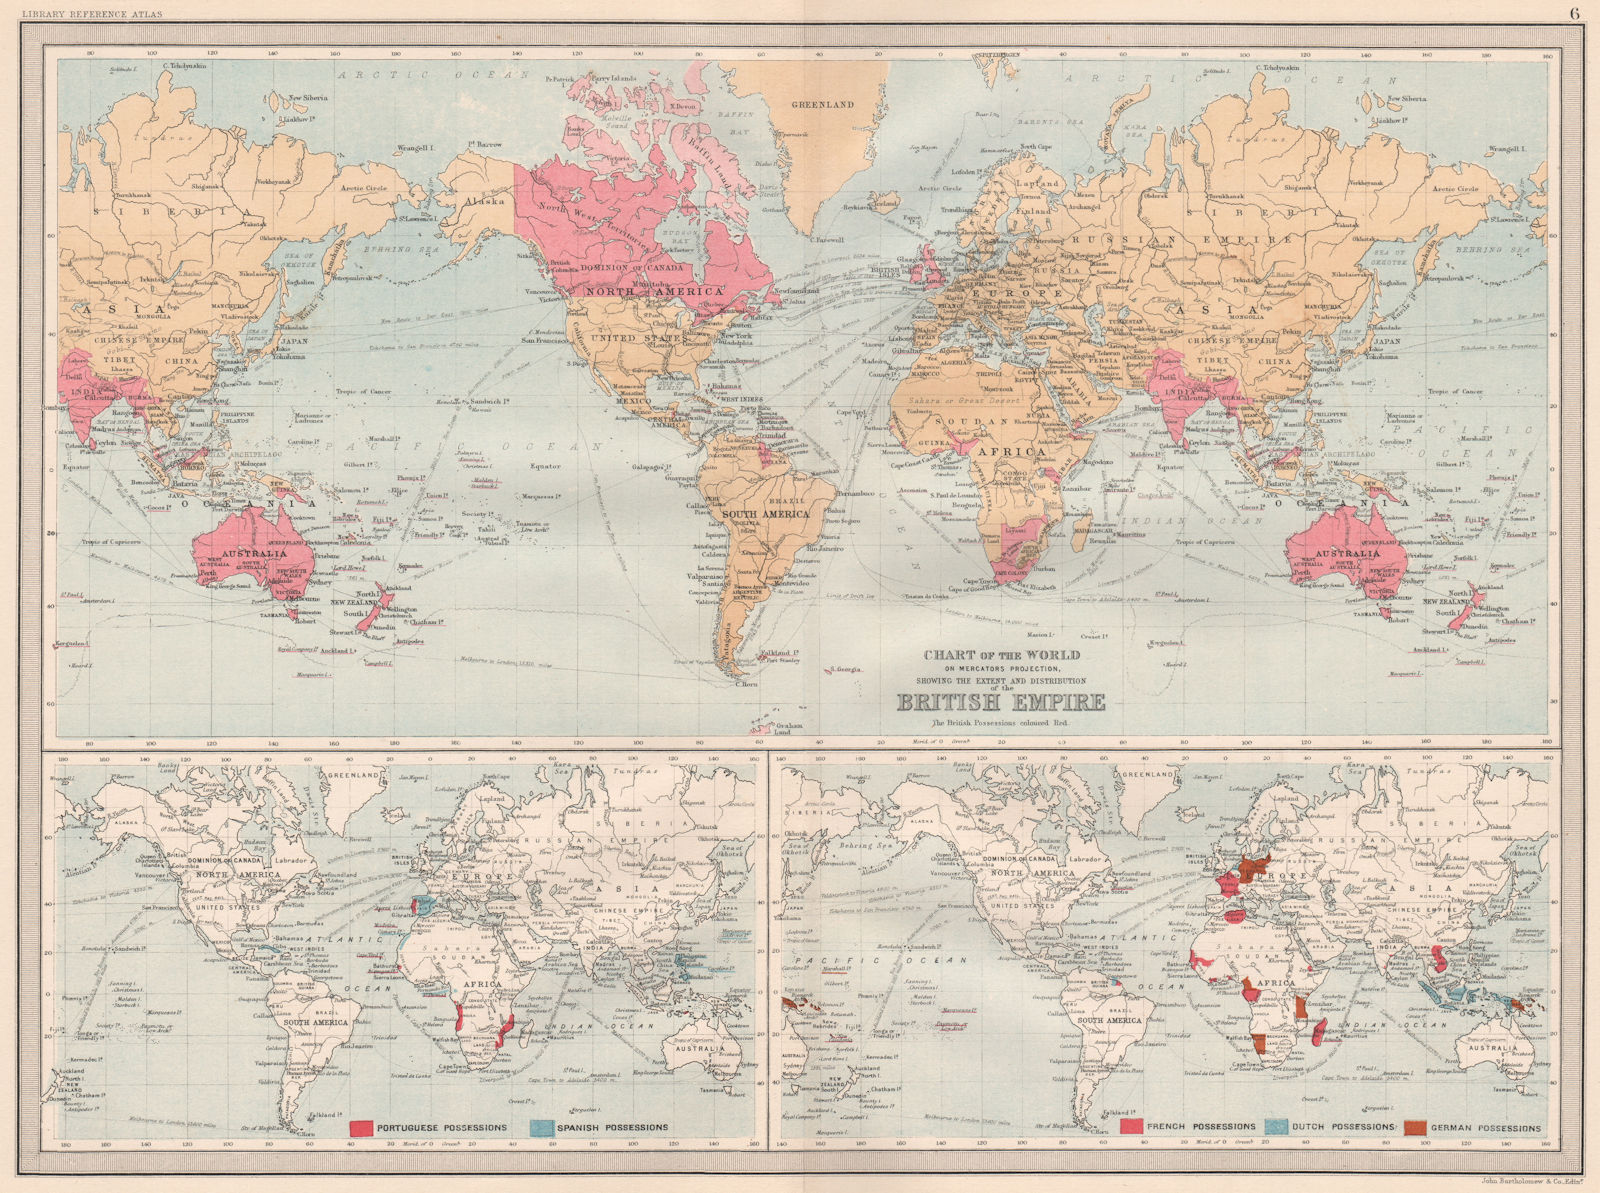 BRITISH EMPIRE. COLONIES. Portuguese Spanish French Dutch German 1890 old map